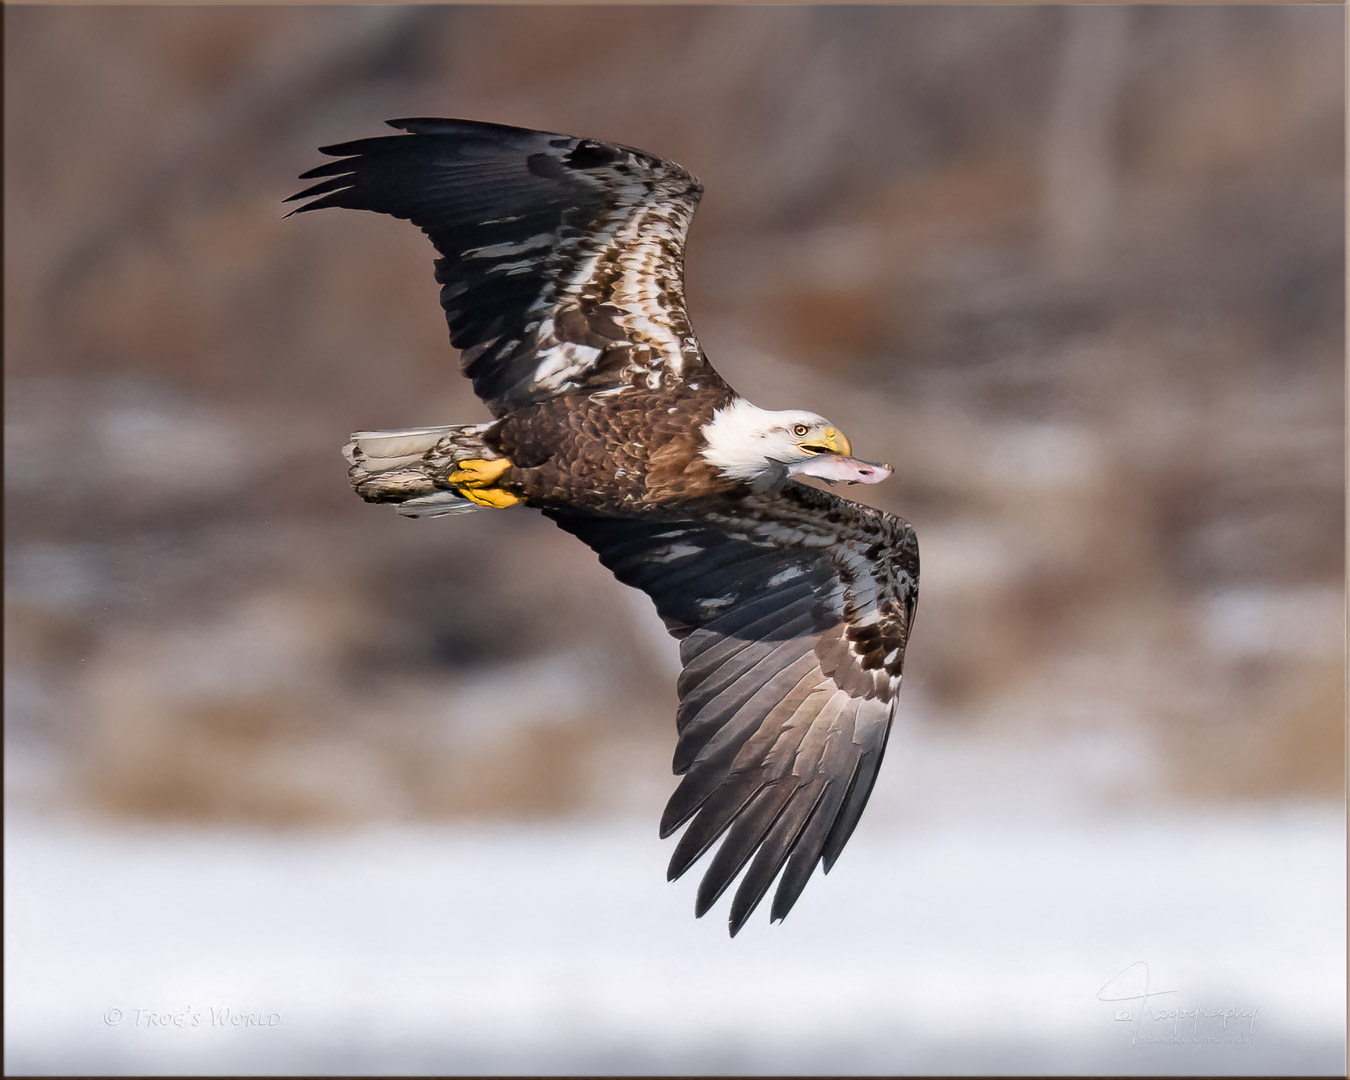 Juvenile Eagle with a fish in its mouth